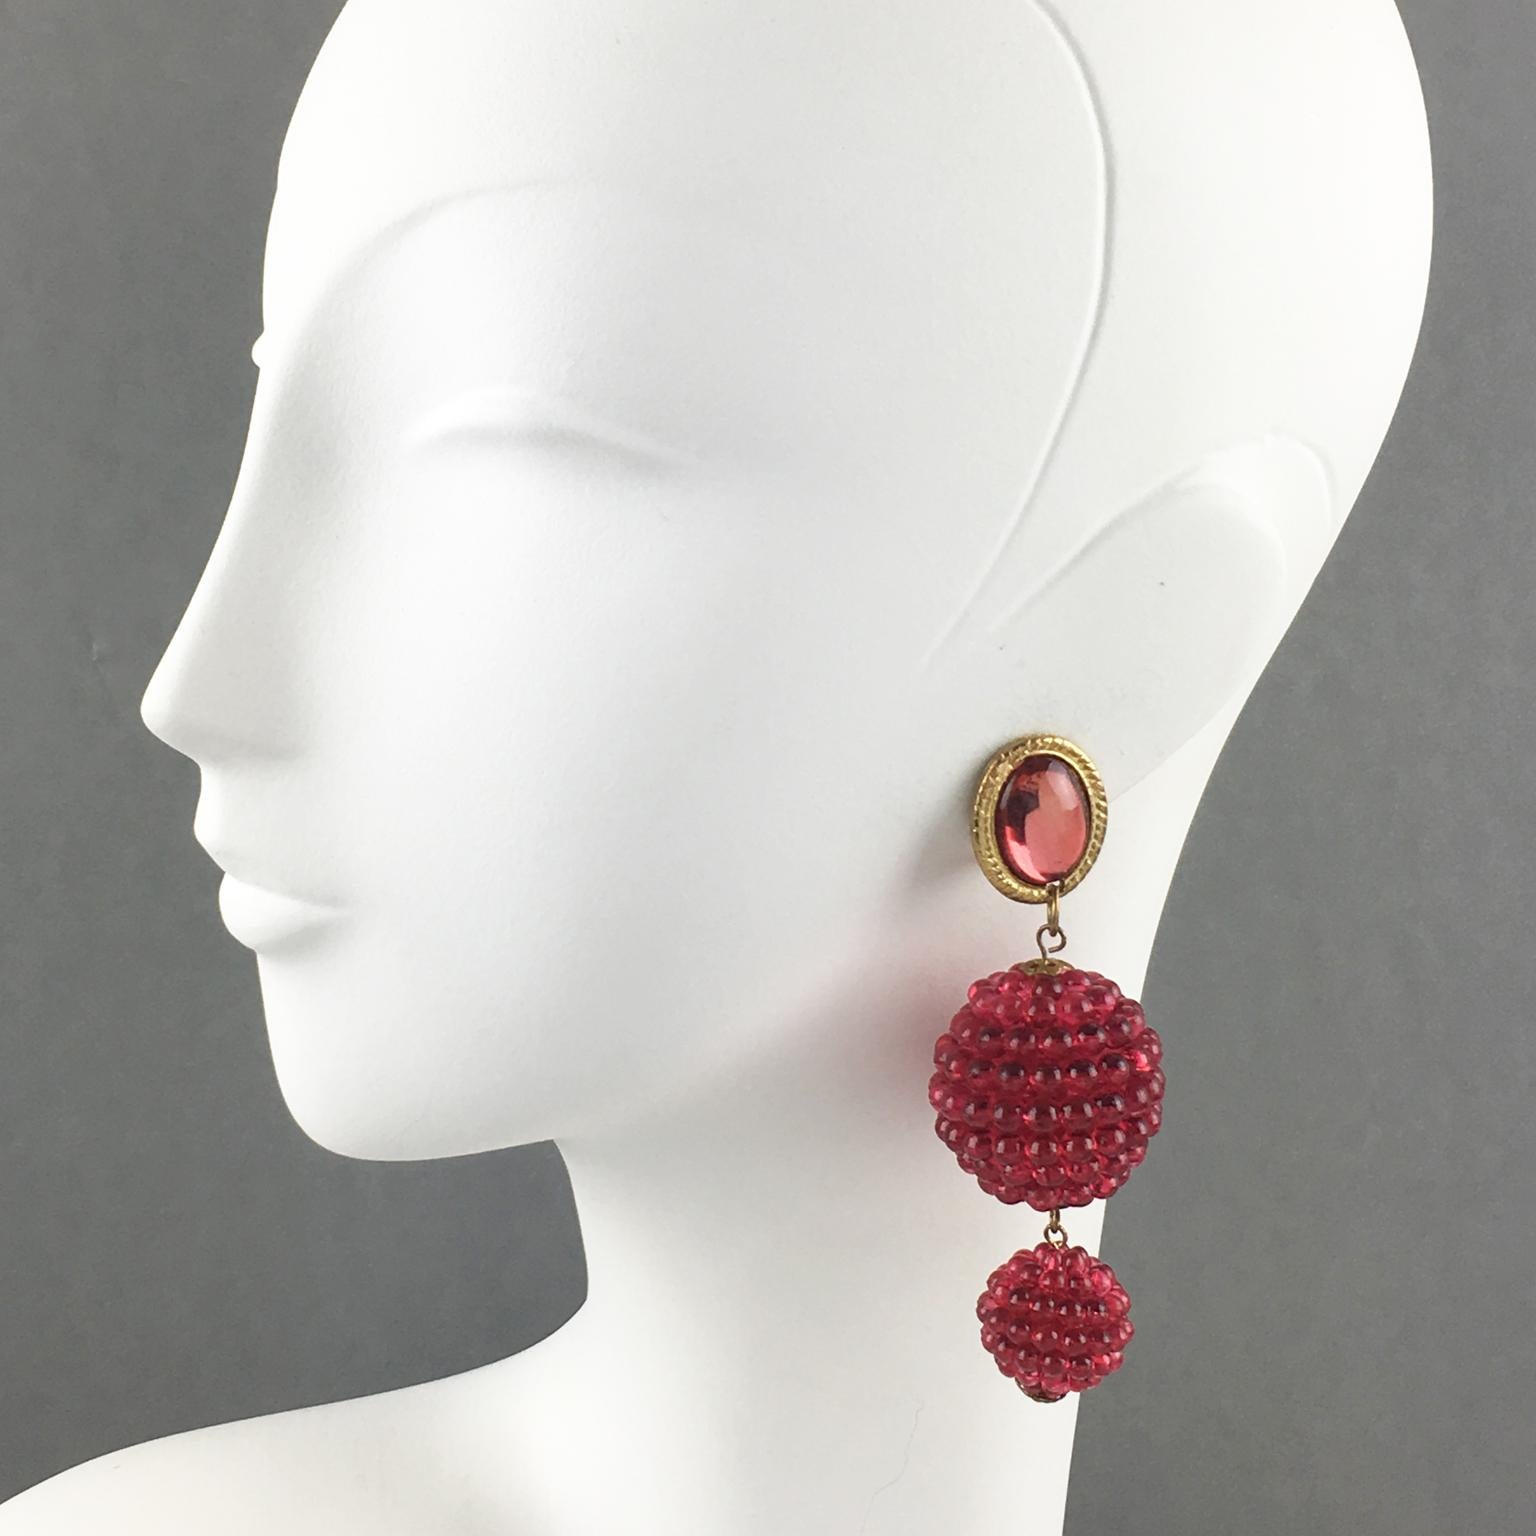 These lovely dangling clip-on earrings have a playful design with textured raspberry-shaped Lucite beads in a transparent fuchsia-pink color. The long dangling shape boasts gilt metal hardware fastenings topped with a light pink-red mirror effect